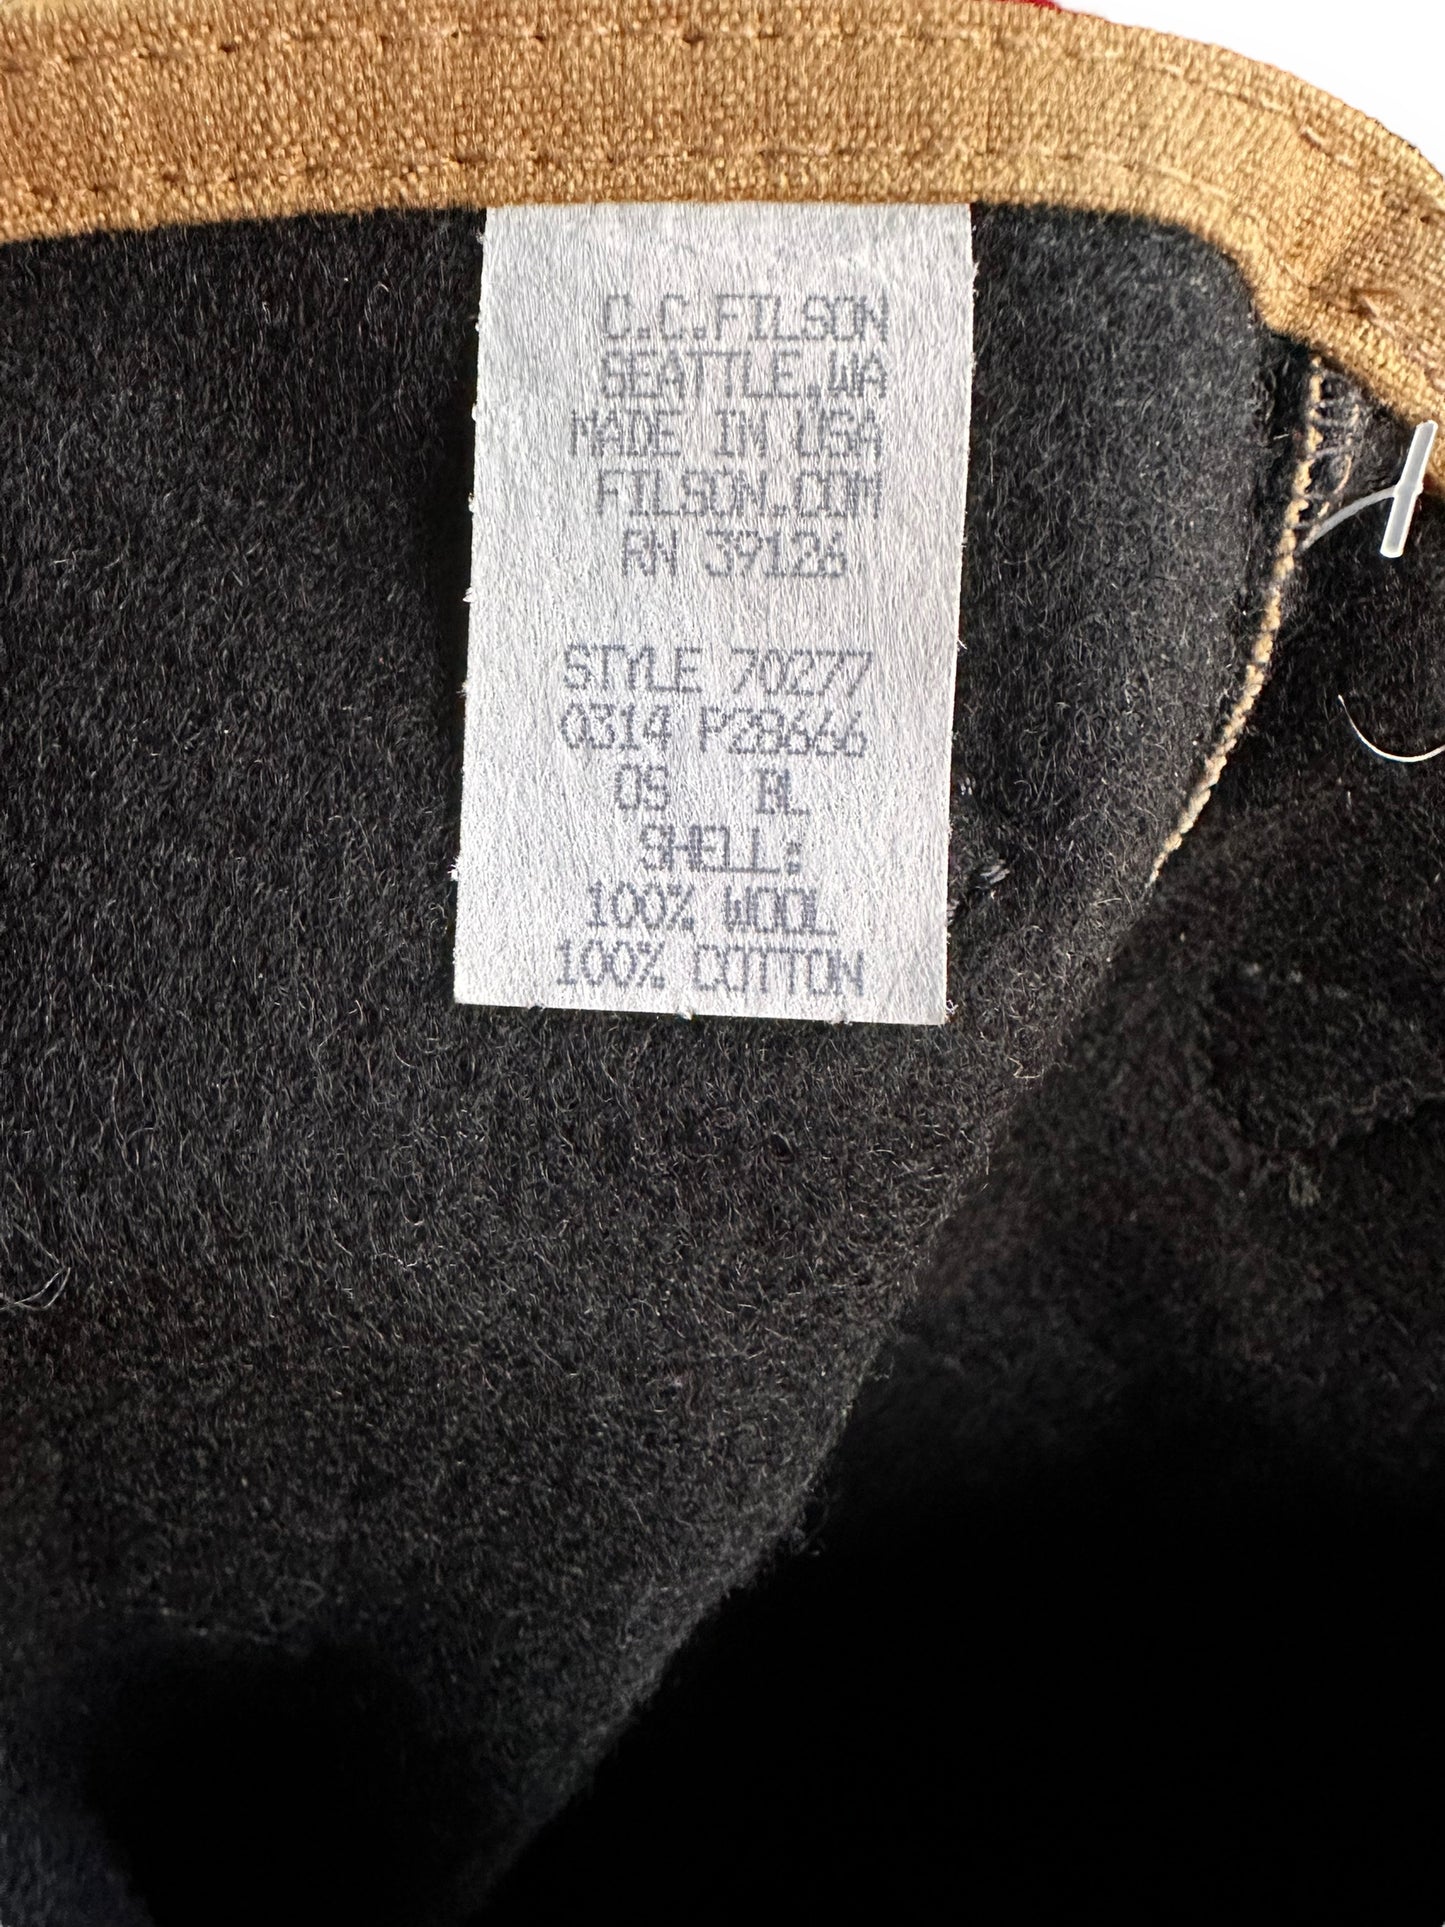 Production Tag View of Filson Wool Tin Cloth Tote Bag SZ S |  Barn Owl Vintage Goods | Vintage Filson Workwear Seattle